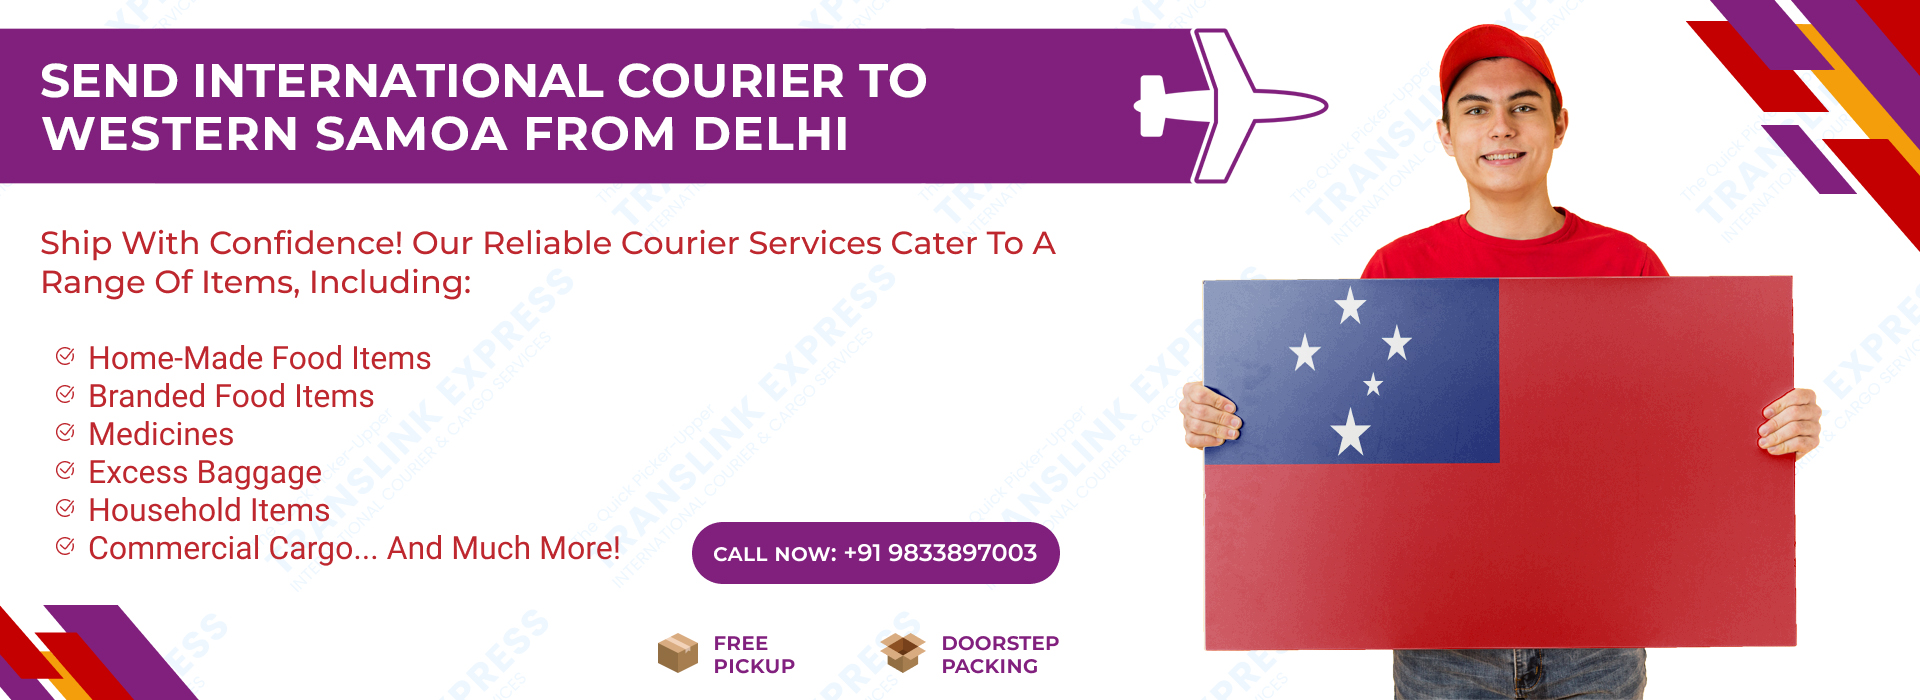 Courier to Western Samoa From Delhi